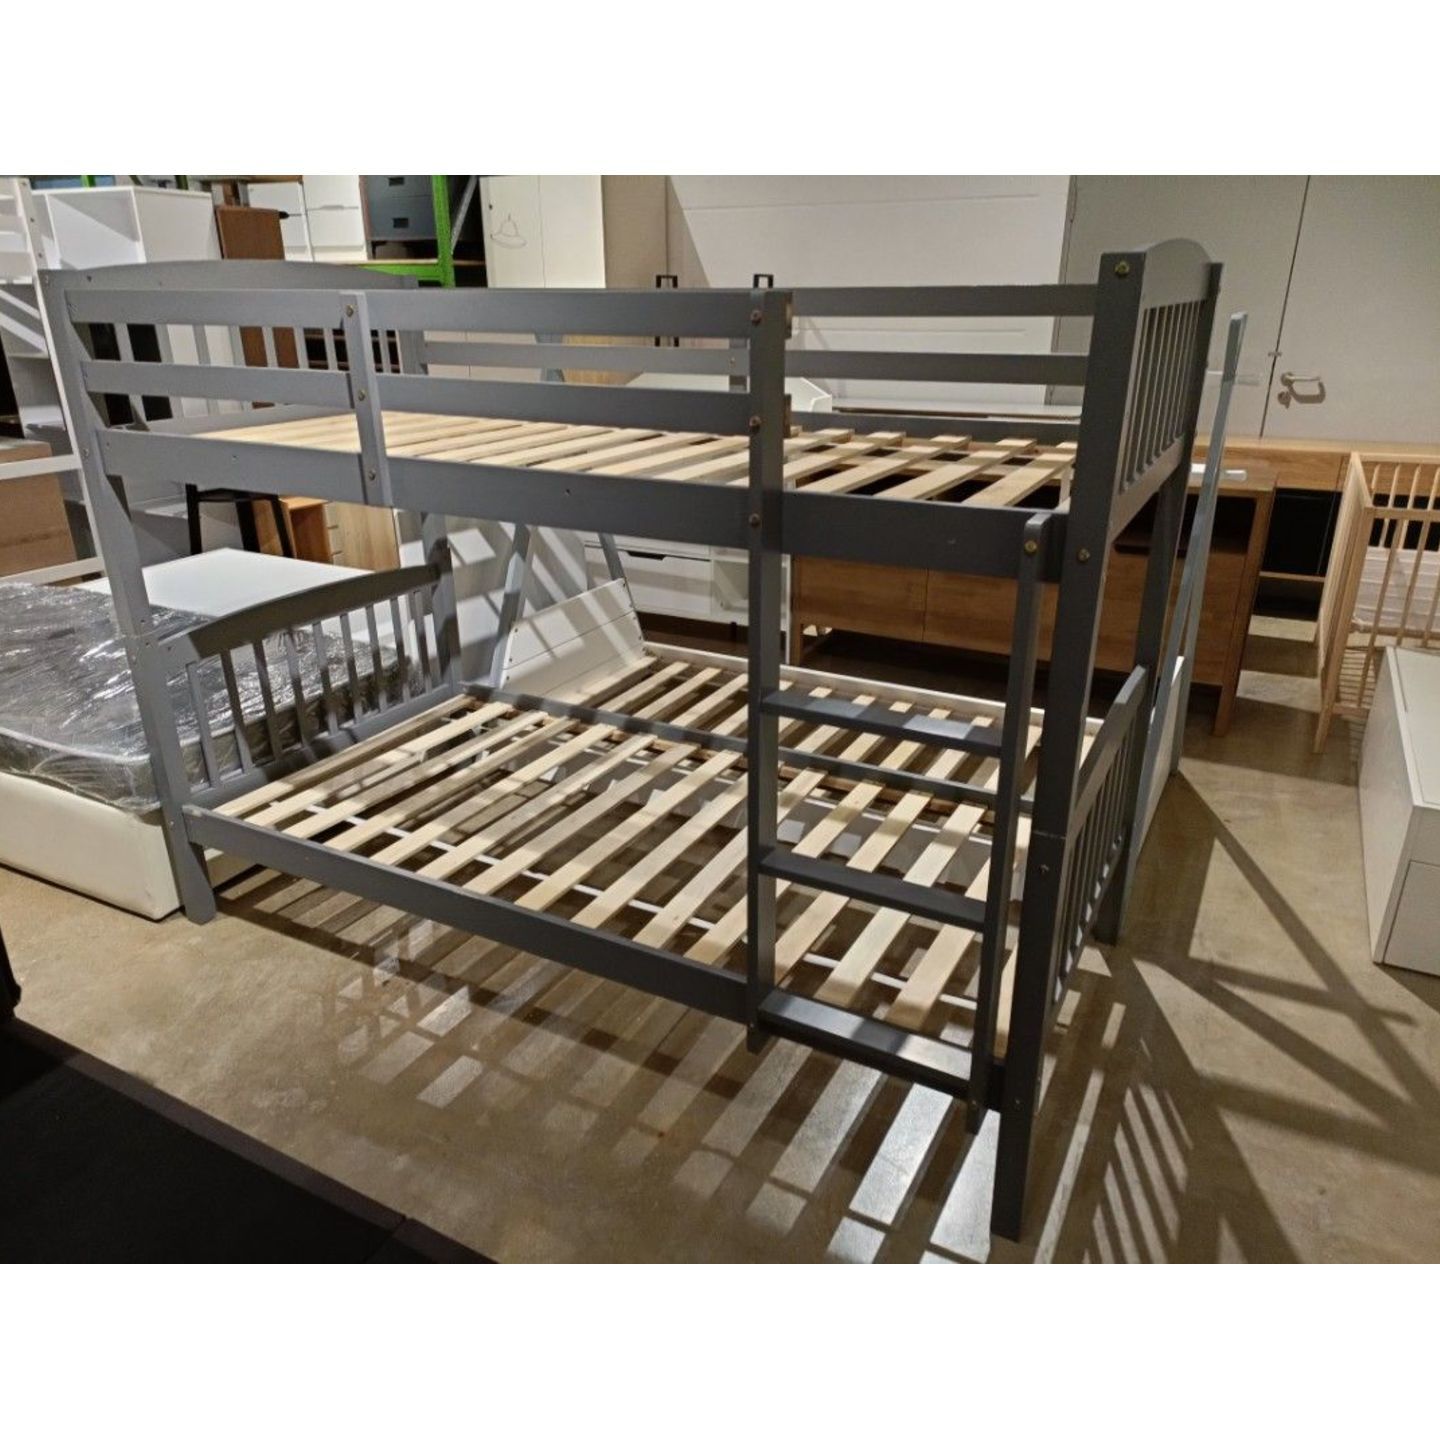 FRARINA Single Size Bunk Bed in GREY